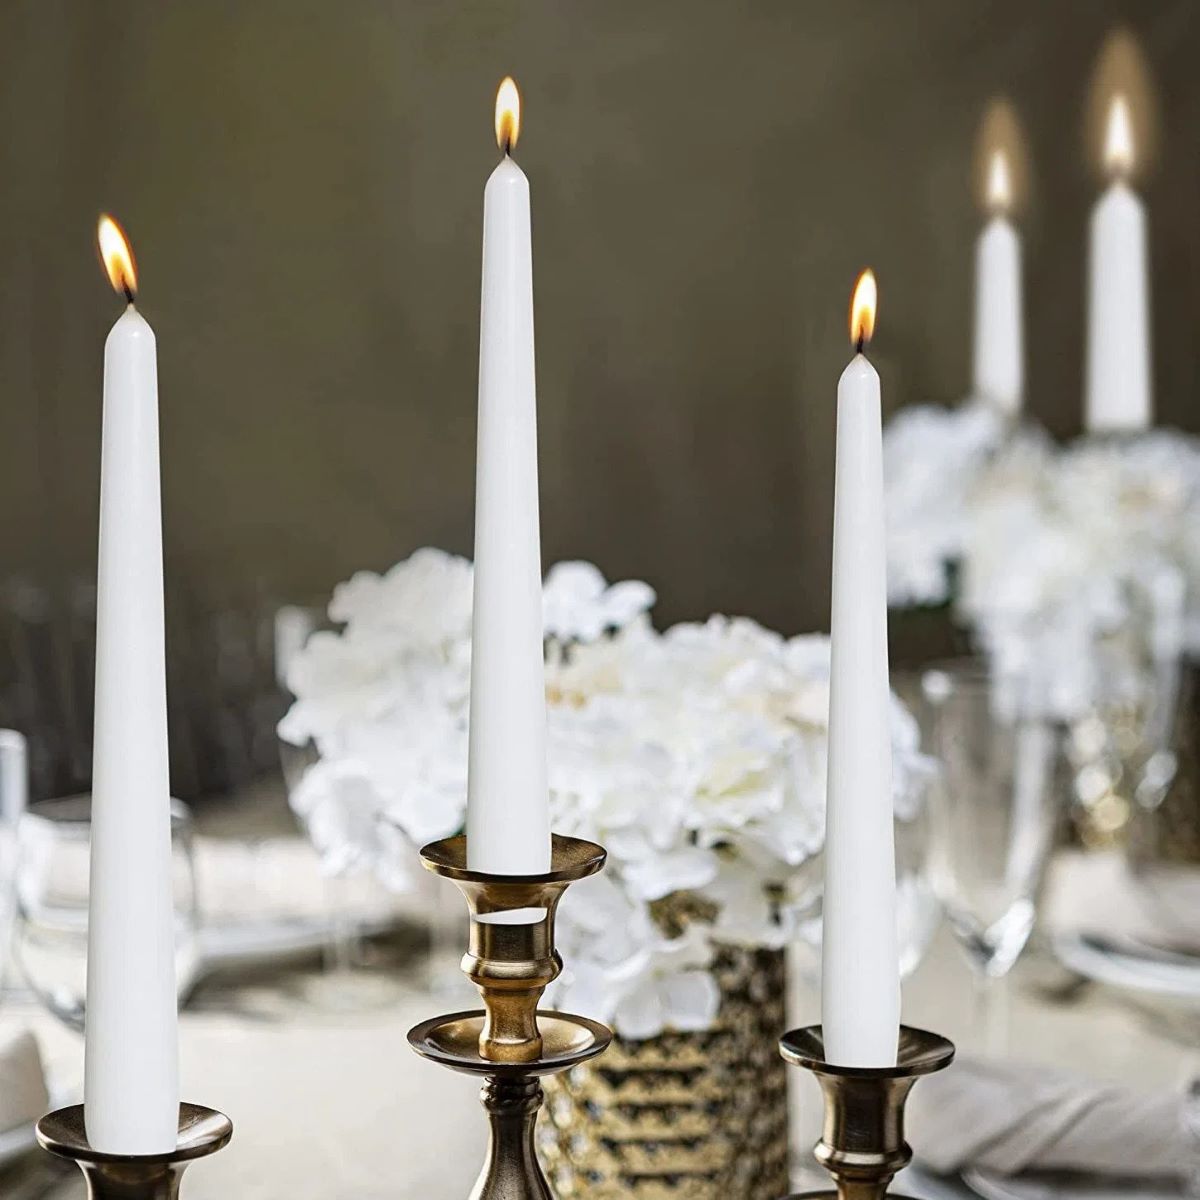 Use This Taper Candle Hack for Your Next Fancy Dinner